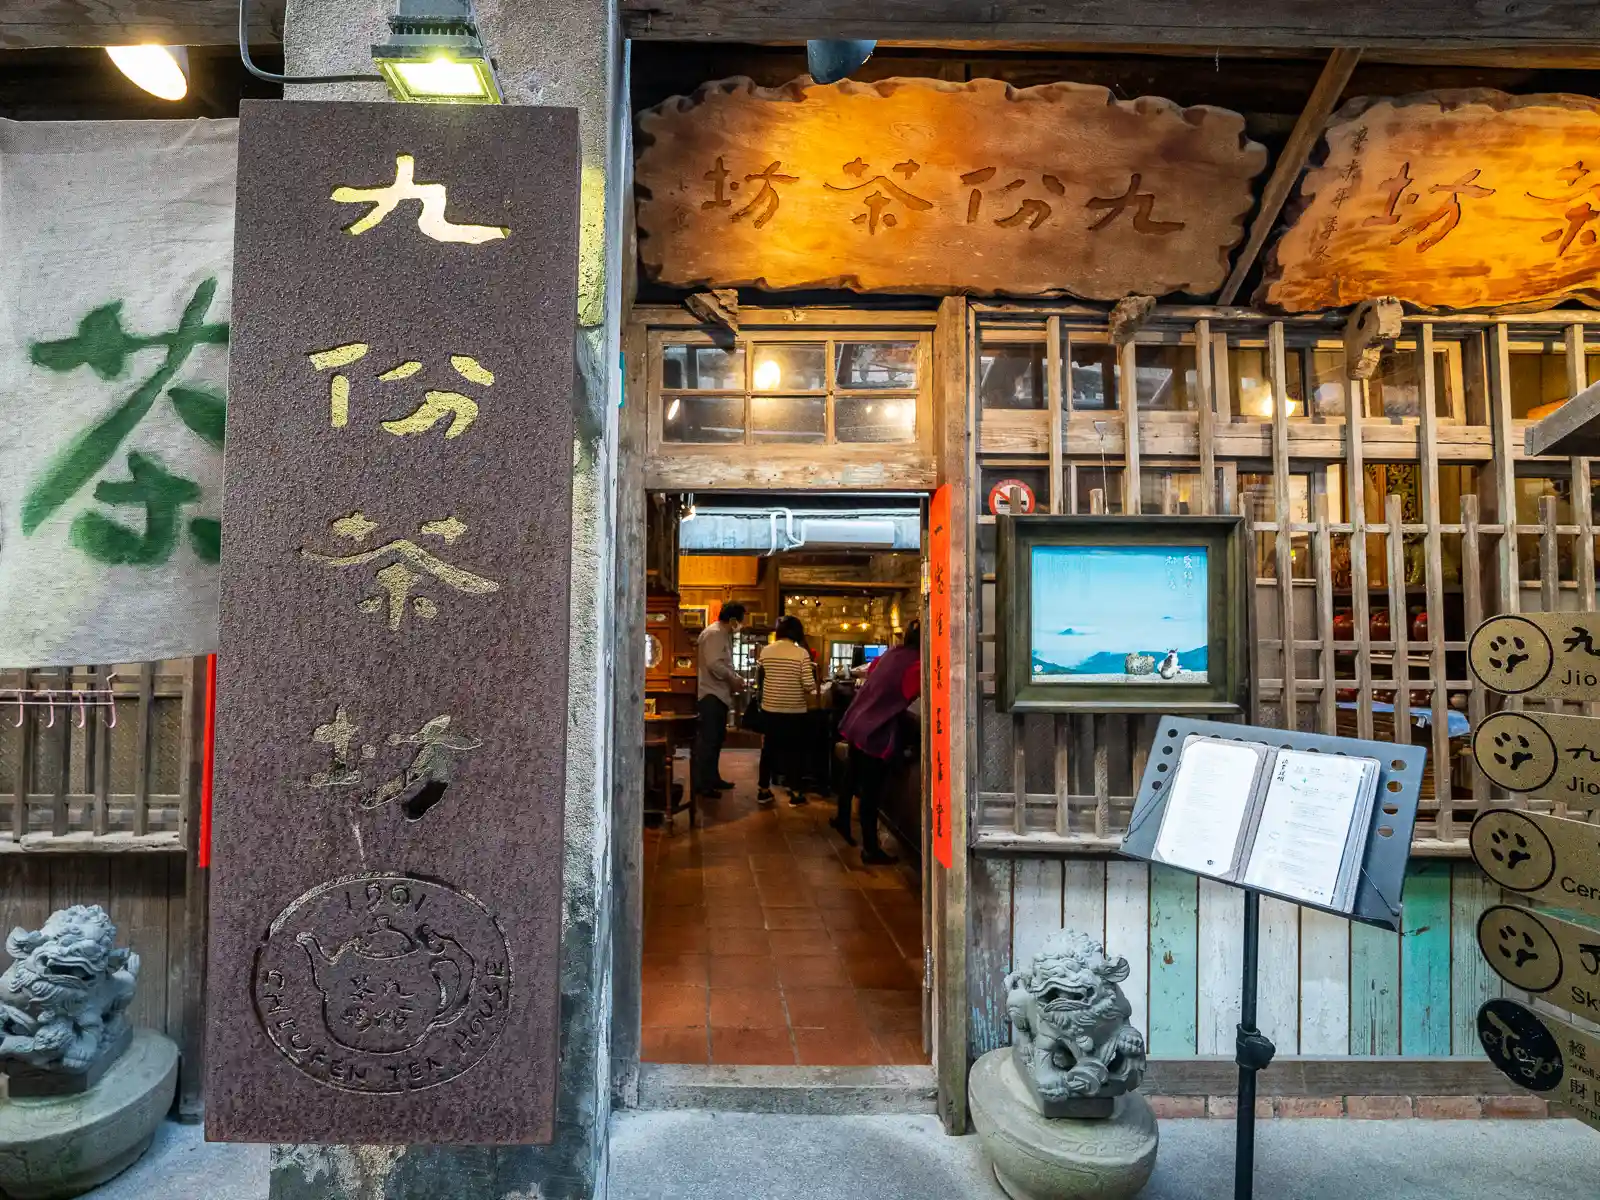 The unimposing entrance to Jioufen Teahouse may make it appear like a regular house or shop.